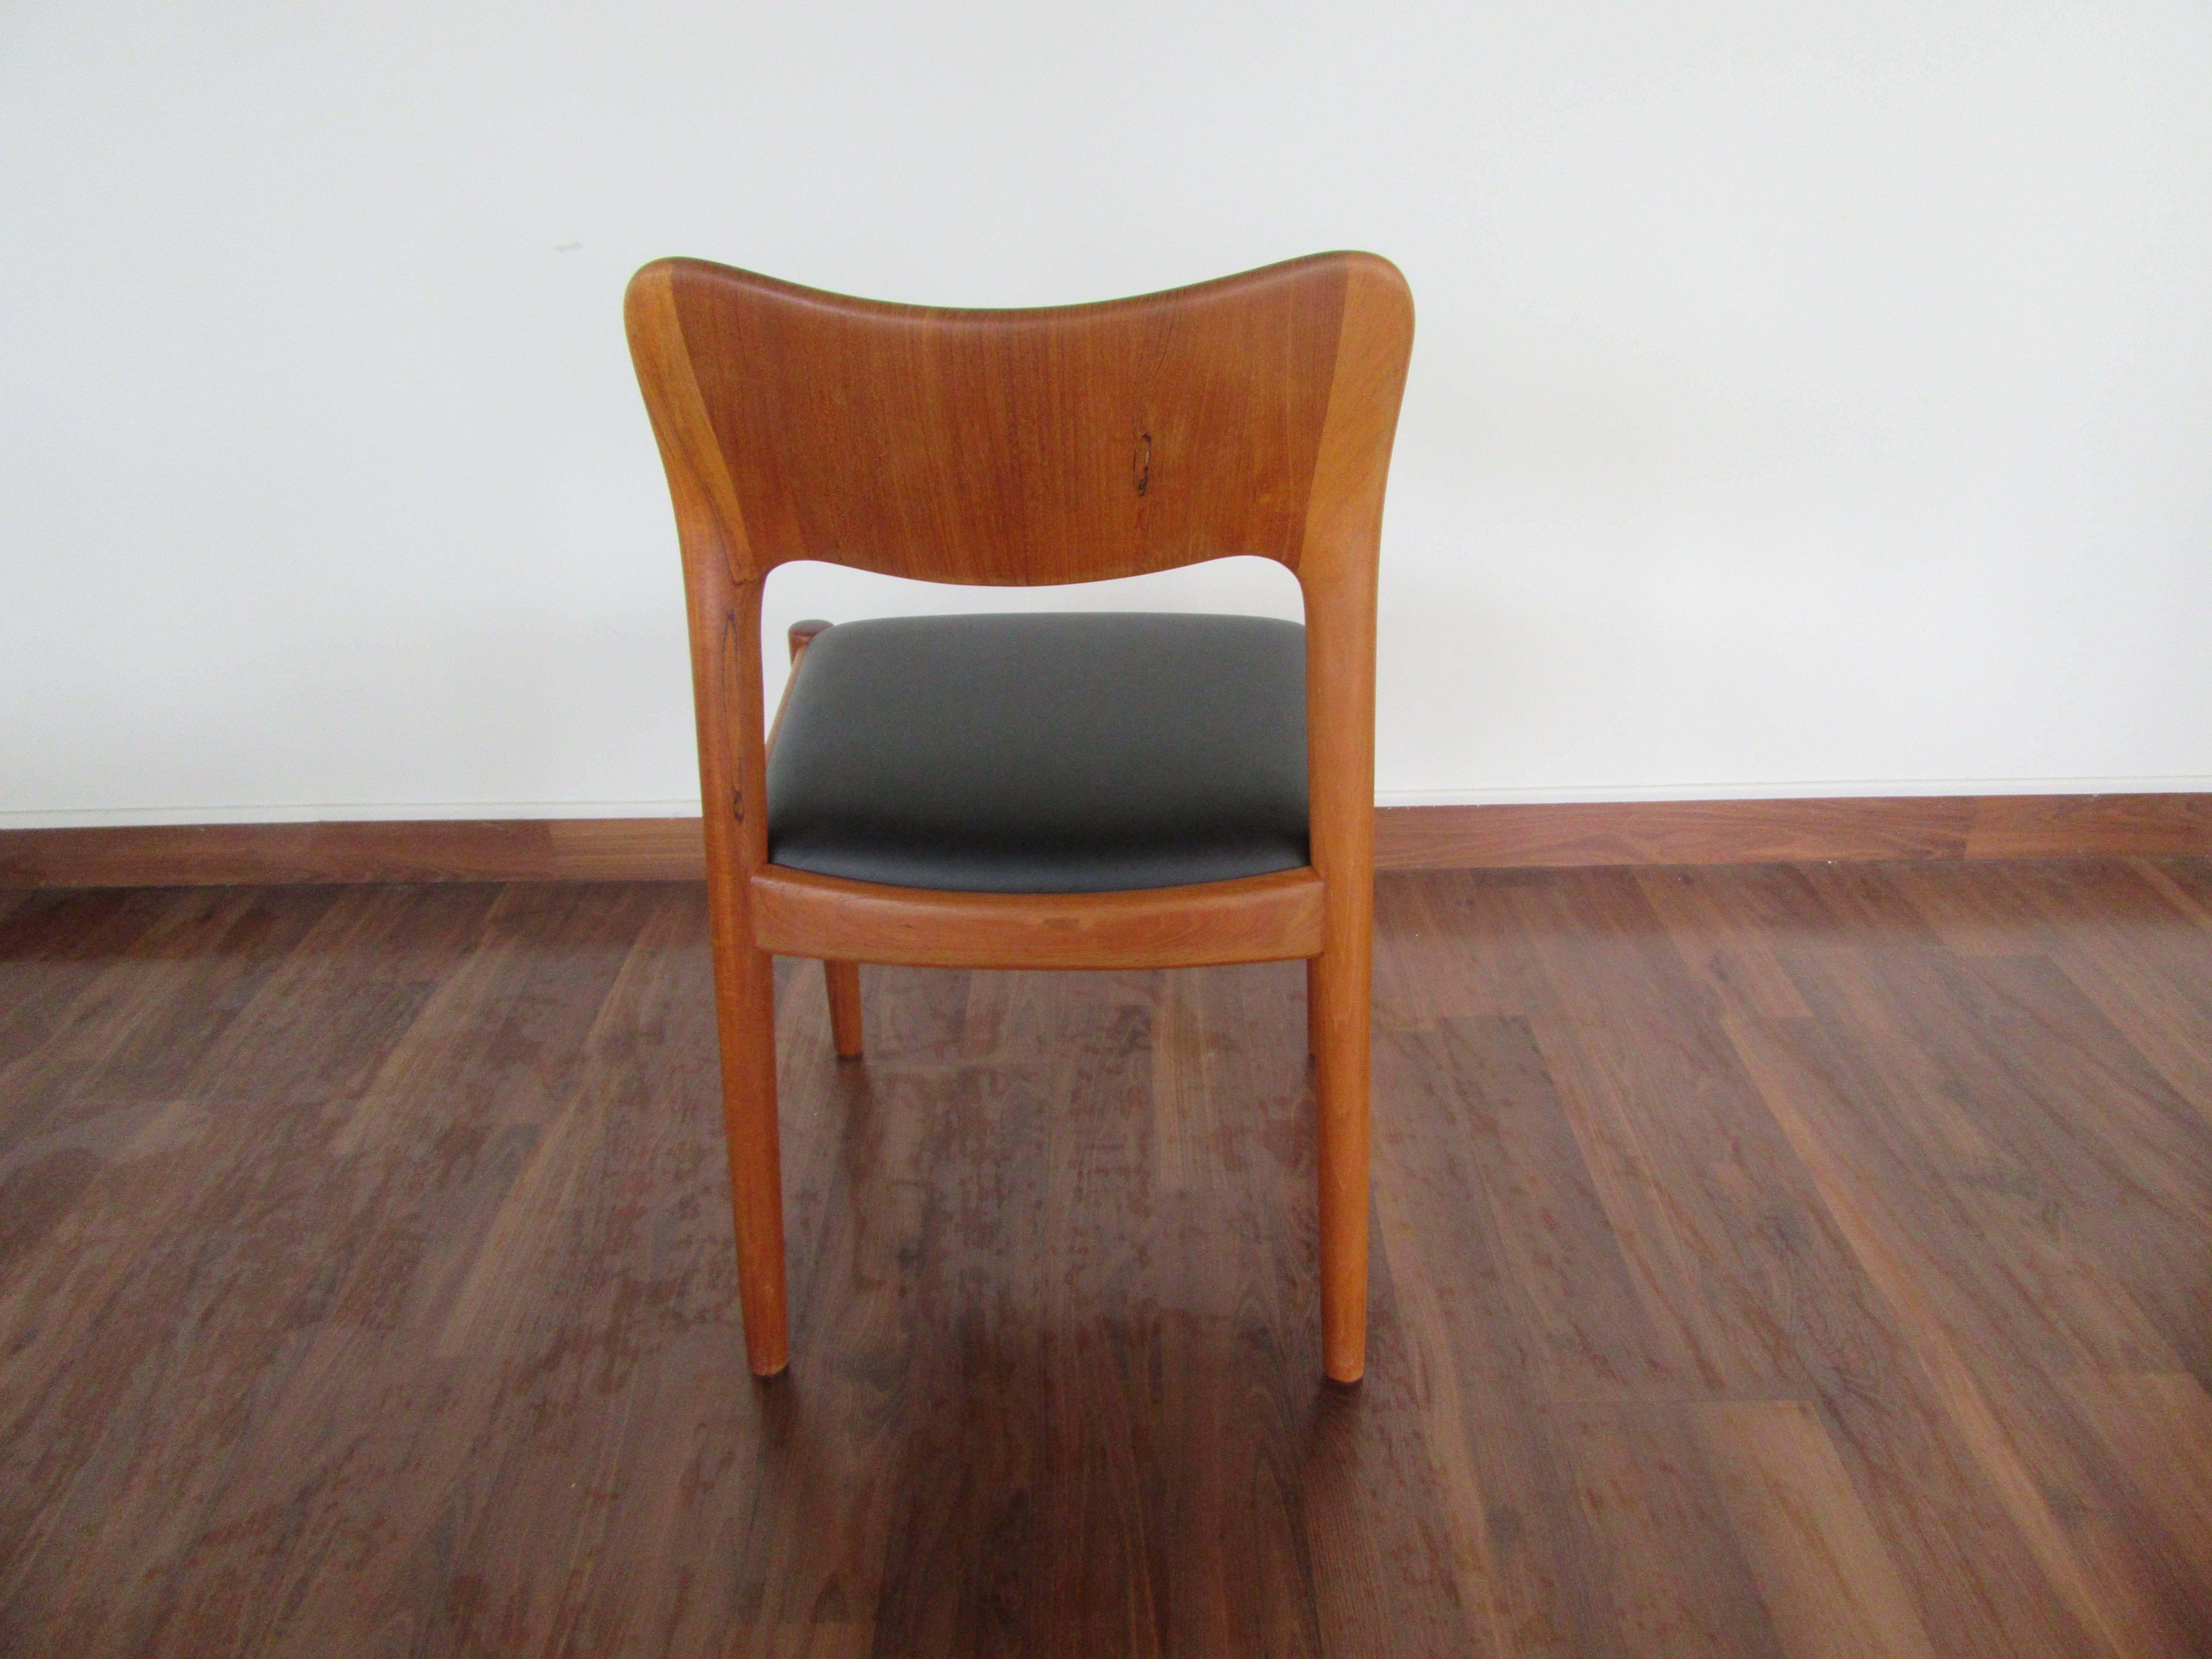 Mid-20th Century Set of Three Teak Dining Chairs by Koefoed Hornslet with Leather Seats